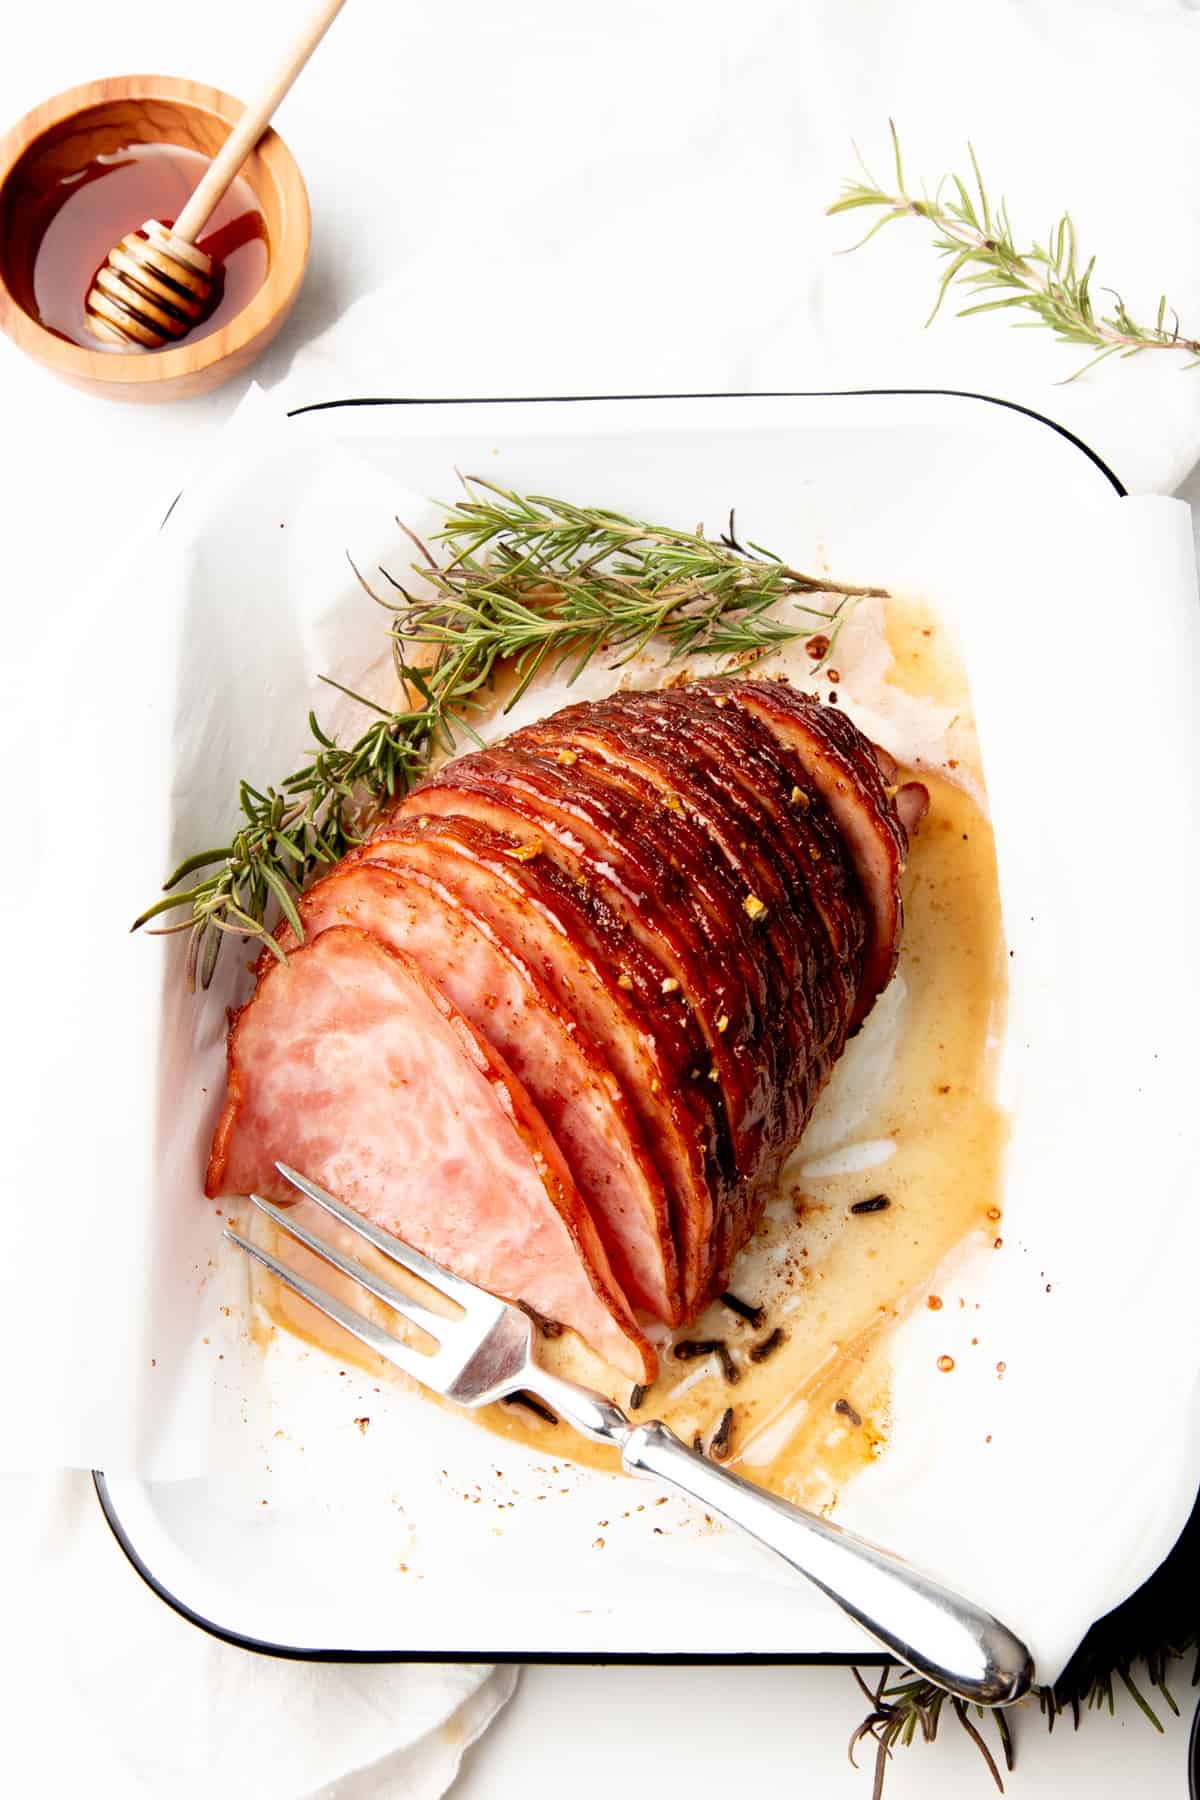 Sliced ham sits in a white rectangular dish. A small bowl of honey is on the side.